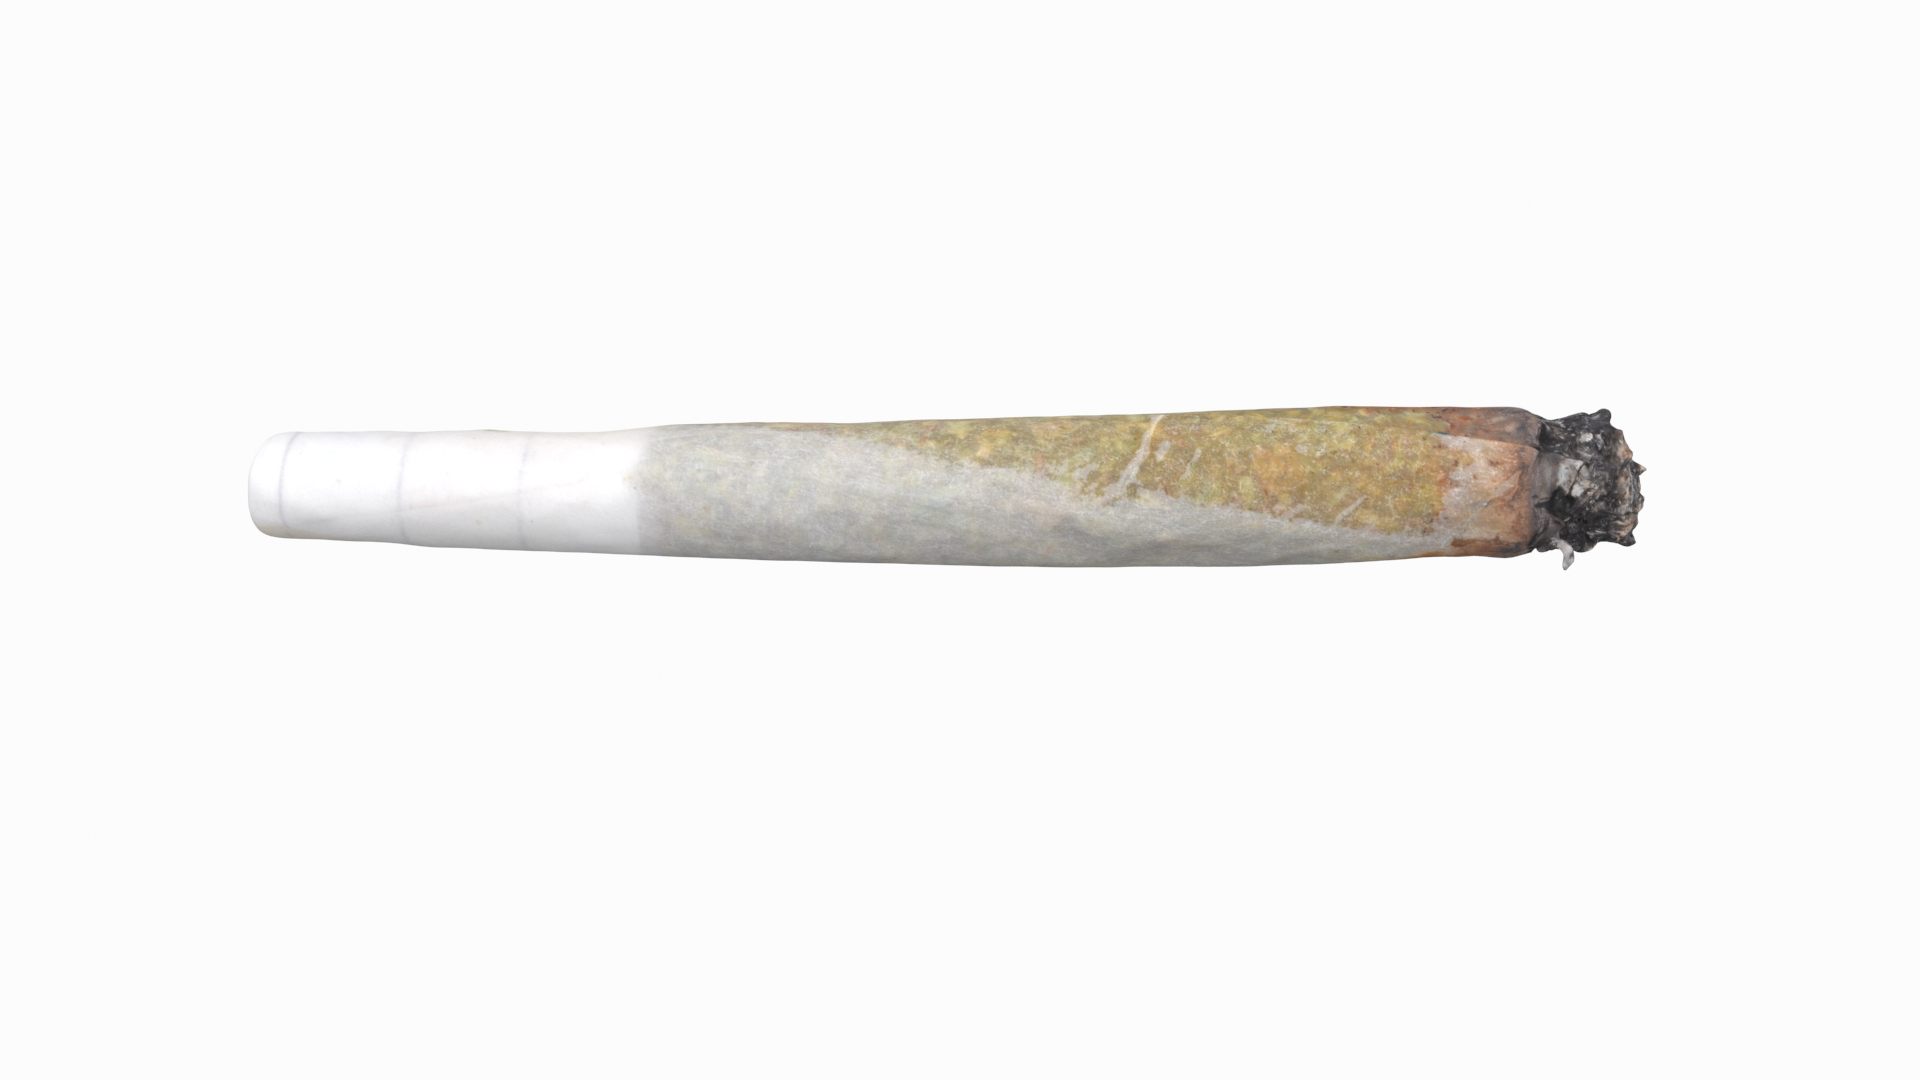 3D model Cannabis Joint Collection https://p.turbosquid.com/ts-thumb/Fa/d7HYwl/0H/joint2tt/png/1672717340/1920x1080/turn_fit_q99/373930361531e080ff9accc5d9b4a060e5d9f507/joint2tt-1.jpg